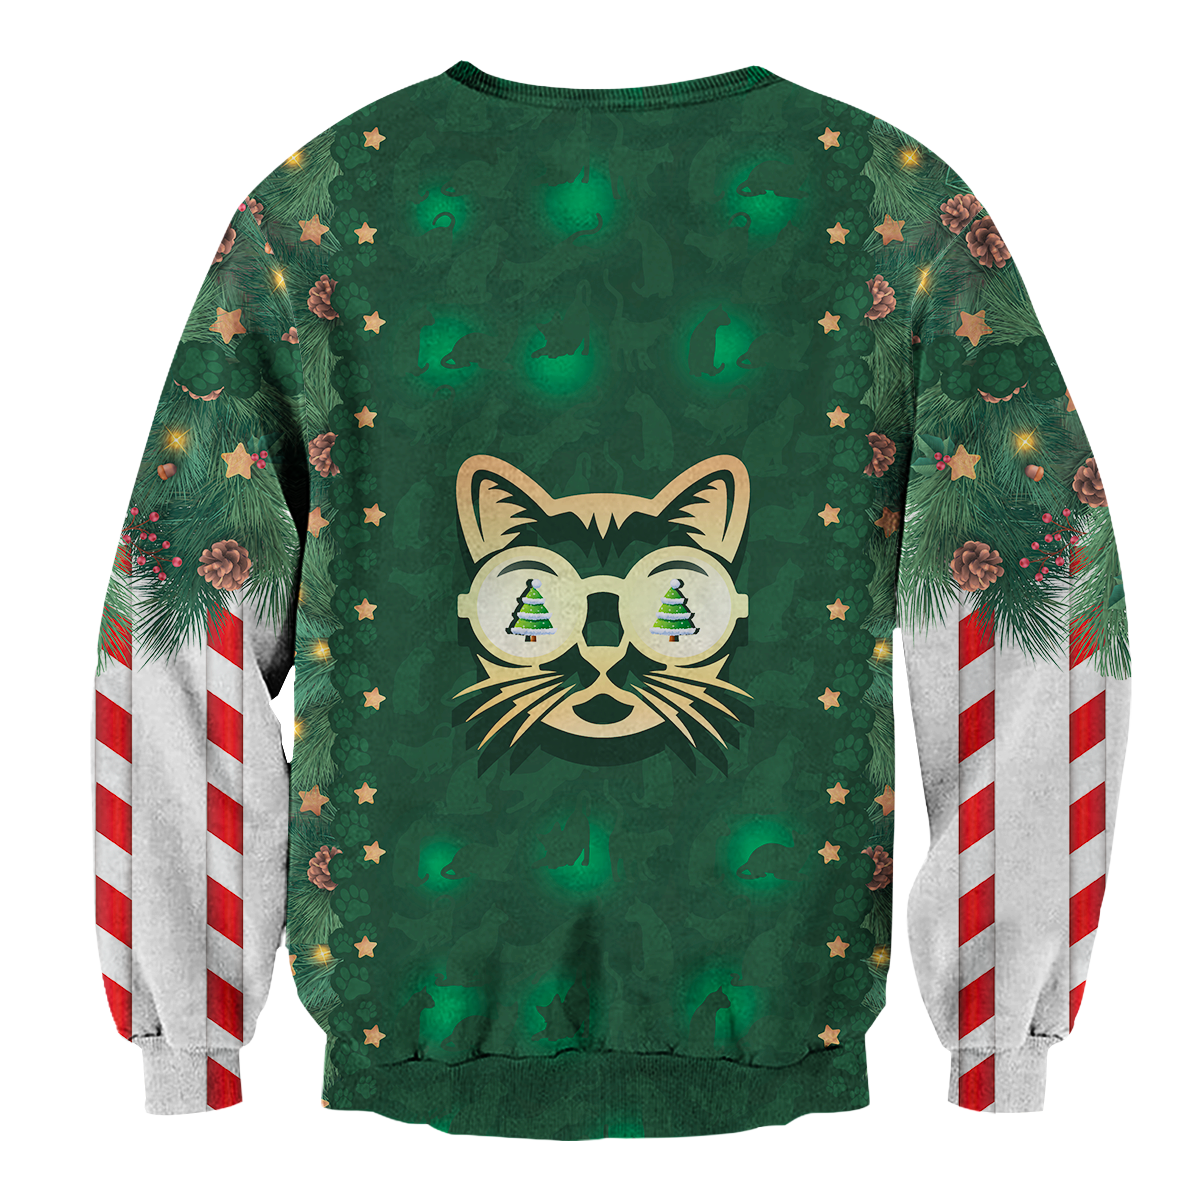 Sorry I Can't I Have Plans With My Cat Unisex Sweater